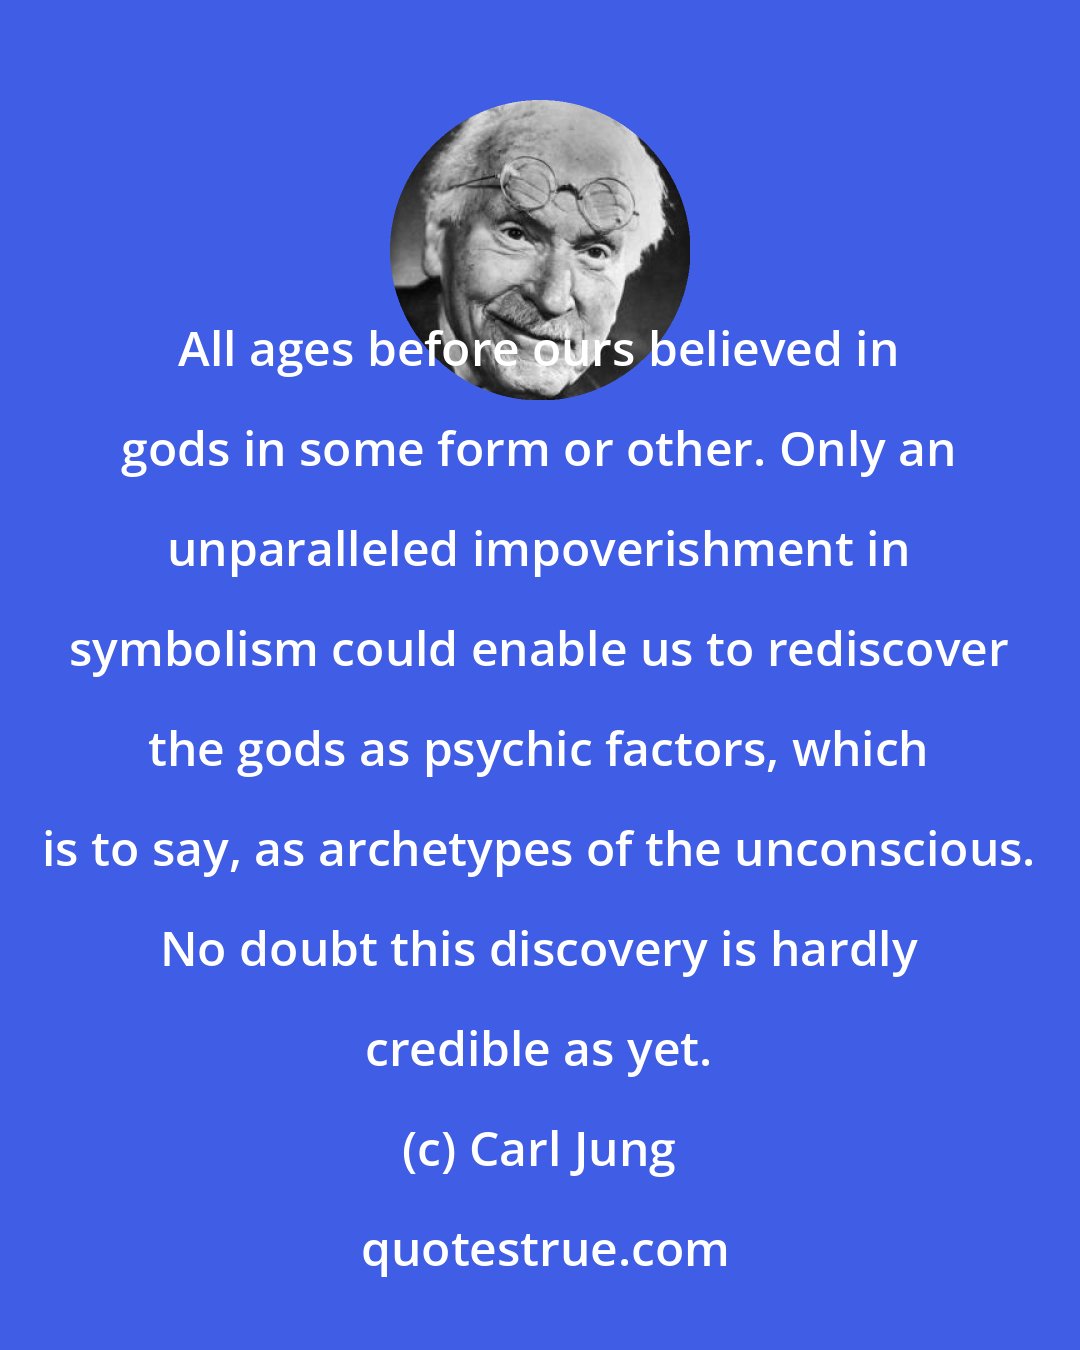 Carl Jung: All ages before ours believed in gods in some form or other. Only an unparalleled impoverishment in symbolism could enable us to rediscover the gods as psychic factors, which is to say, as archetypes of the unconscious. No doubt this discovery is hardly credible as yet.